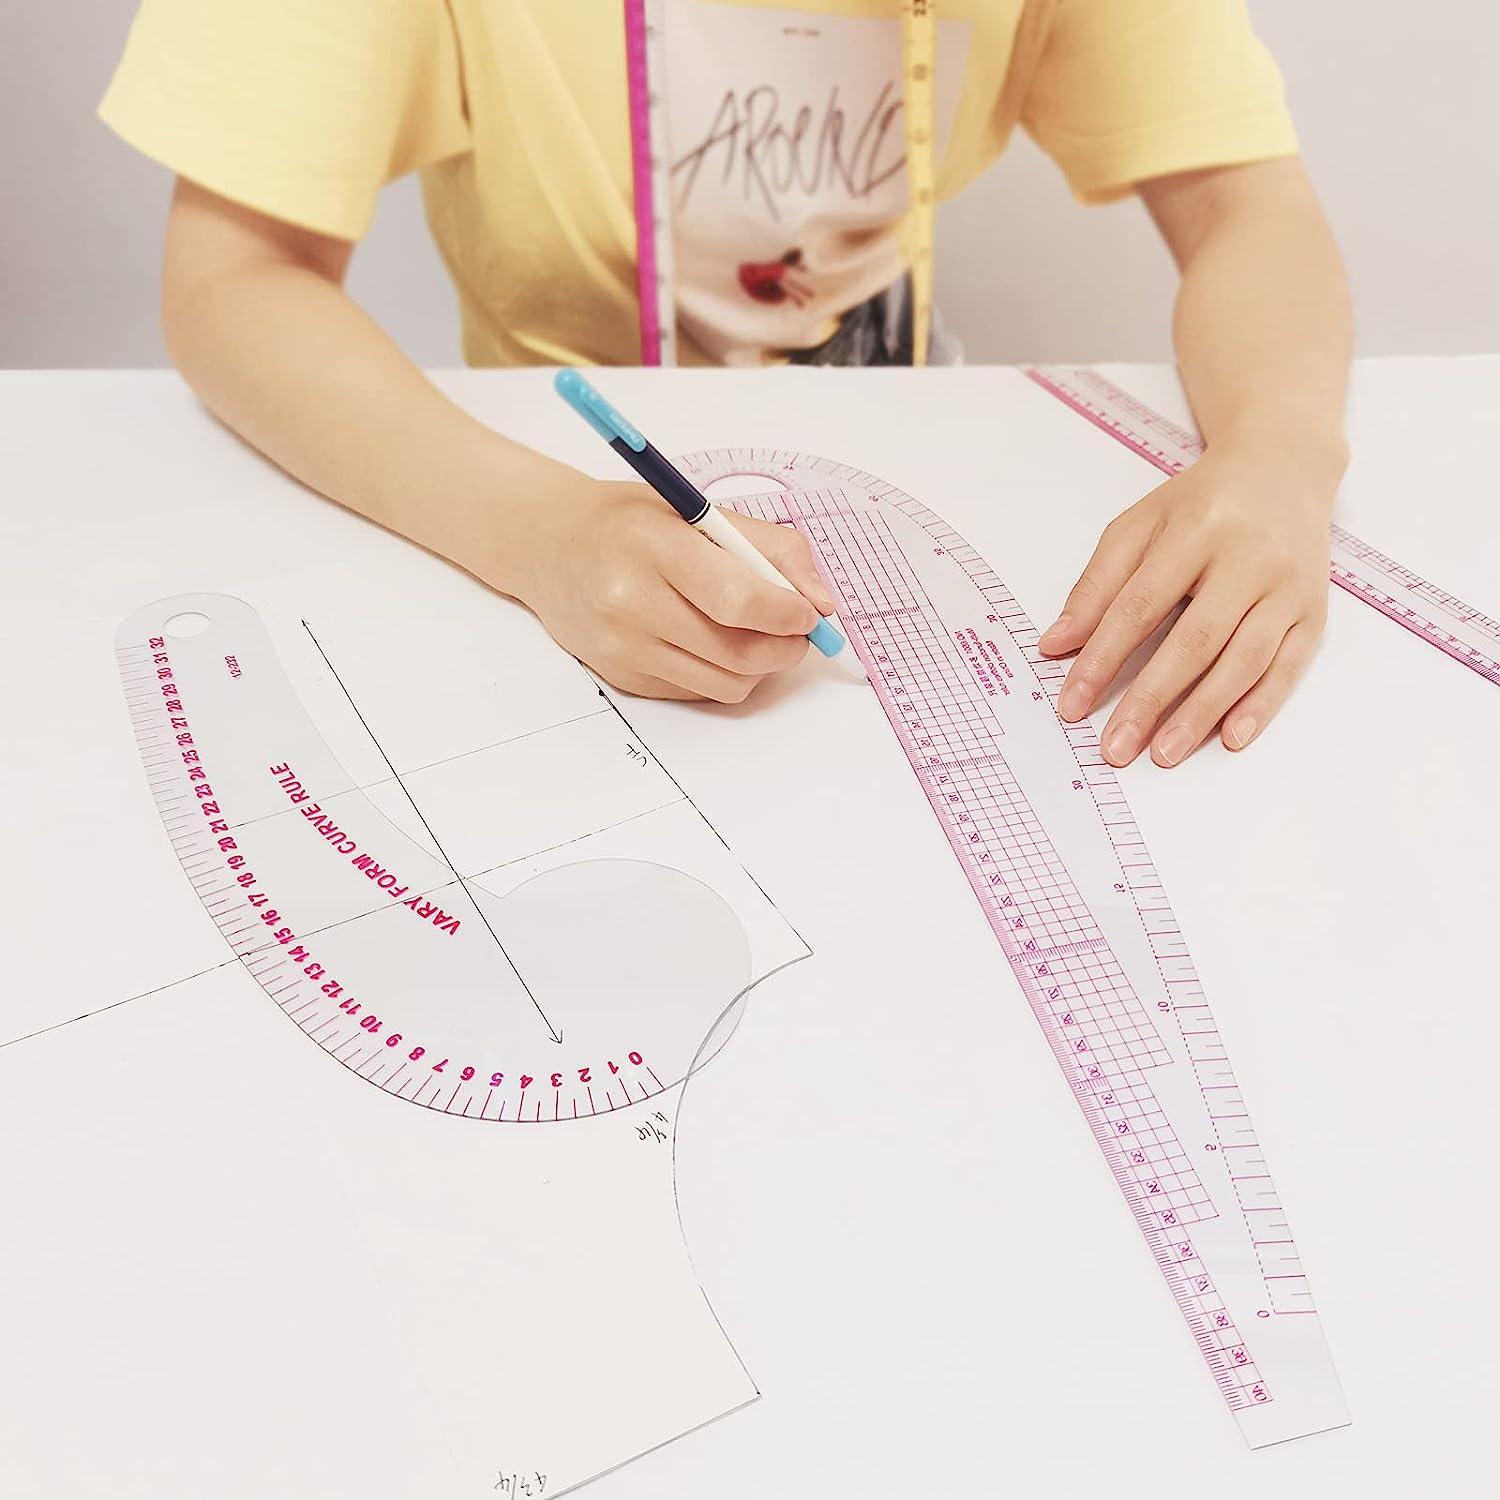 HLZC French Curve Ruler for Pattern Making, 15 Pieces Clear Sewing